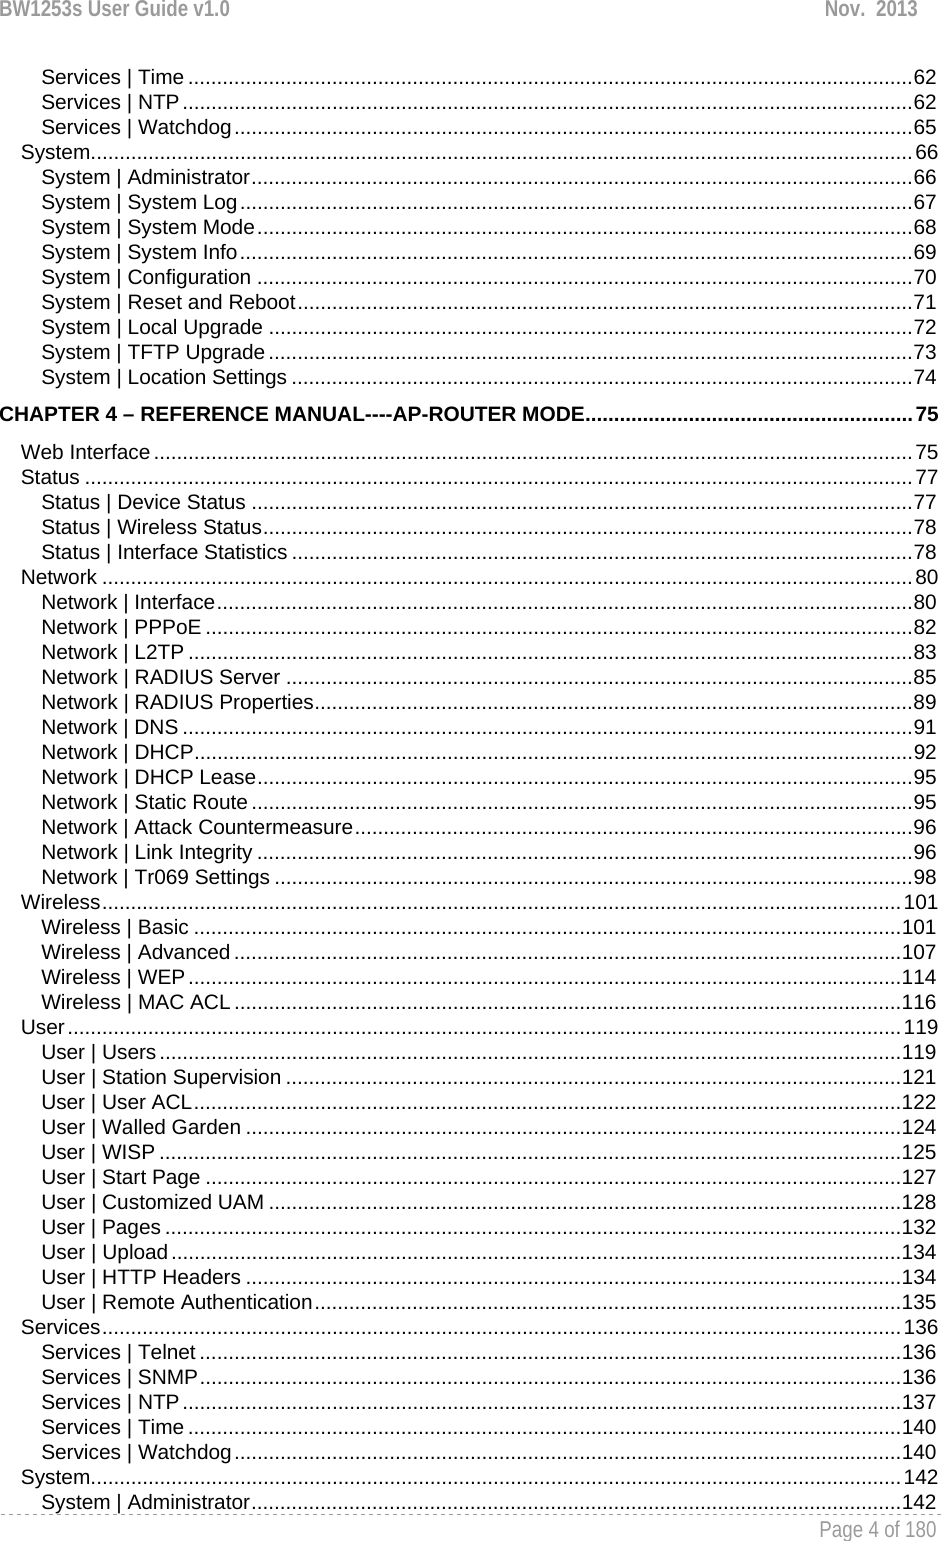 BW1253s User Guide v1.0  Nov.  2013     Page 4 of 180   Services | Time .............................................................................................................................. 62Services | NTP ............................................................................................................................... 62Services | Watchdog ...................................................................................................................... 65System ............................................................................................................................................... 66System | Administrator ................................................................................................................... 66System | System Log ..................................................................................................................... 67System | System Mode .................................................................................................................. 68System | System Info ..................................................................................................................... 69System | Configuration .................................................................................................................. 70System | Reset and Reboot ........................................................................................................... 71System | Local Upgrade ................................................................................................................ 72System | TFTP Upgrade ................................................................................................................ 73System | Location Settings ............................................................................................................ 74CHAPTER 4 – REFERENCE MANUAL----AP-ROUTER MODE ......................................................... 75Web Interface .................................................................................................................................... 75Status ................................................................................................................................................ 77Status | Device Status ................................................................................................................... 77Status | Wireless Status ................................................................................................................. 78Status | Interface Statistics ............................................................................................................ 78Network ............................................................................................................................................. 80Network | Interface ......................................................................................................................... 80Network | PPPoE ........................................................................................................................... 82Network | L2TP .............................................................................................................................. 83Network | RADIUS Server ............................................................................................................. 85Network | RADIUS Properties ........................................................................................................ 89Network | DNS ............................................................................................................................... 91Network | DHCP ............................................................................................................................. 92Network | DHCP Lease .................................................................................................................. 95Network | Static Route ................................................................................................................... 95Network | Attack Countermeasure ................................................................................................. 96Network | Link Integrity .................................................................................................................. 96Network | Tr069 Settings ............................................................................................................... 98Wireless ........................................................................................................................................... 101Wireless | Basic ........................................................................................................................... 101Wireless | Advanced .................................................................................................................... 107Wireless | WEP ............................................................................................................................ 114Wireless | MAC ACL .................................................................................................................... 116User ................................................................................................................................................. 119User | Users ................................................................................................................................. 119User | Station Supervision ........................................................................................................... 121User | User ACL ........................................................................................................................... 122User | Walled Garden .................................................................................................................. 124User | WISP ................................................................................................................................. 125User | Start Page ......................................................................................................................... 127User | Customized UAM .............................................................................................................. 128User | Pages ................................................................................................................................ 132User | Upload ............................................................................................................................... 134User | HTTP Headers .................................................................................................................. 134User | Remote Authentication ...................................................................................................... 135Services ........................................................................................................................................... 136Services | Telnet .......................................................................................................................... 136Services | SNMP .......................................................................................................................... 136Services | NTP ............................................................................................................................. 137Services | Time ............................................................................................................................ 140Services | Watchdog .................................................................................................................... 140System ............................................................................................................................................. 142System | Administrator ................................................................................................................. 142